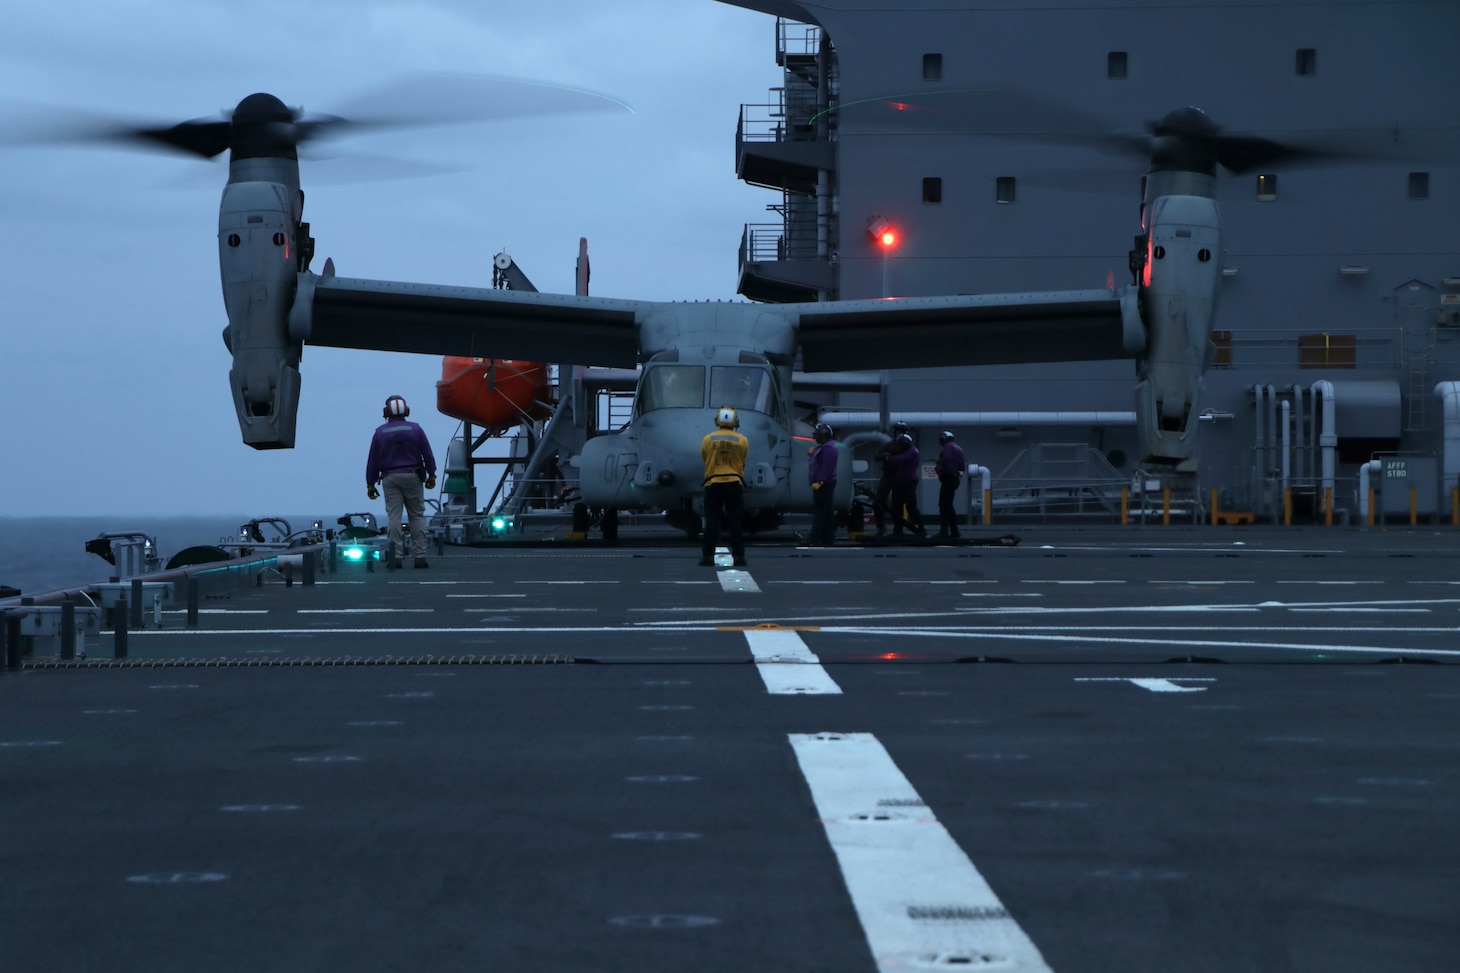 PHILIPPINE SEA (Jan. 28, 2022) An MV-22B Osprey tiltrotor aircraft from the 31st Marine Expeditionary Unit (MEU) refuels on the flight deck of USS Miguel Keith (ESB 5). Miguel Keith, assigned to Expeditionary Strike Group 7, is currently operating as the Theater Littoral Warfare Commander's flagship in the U.S. 7th Fleet area of responsibility to enhance interoperability with allies and partners and serve as a ready response force to defend peace and stability in the Indo-Pacific region.